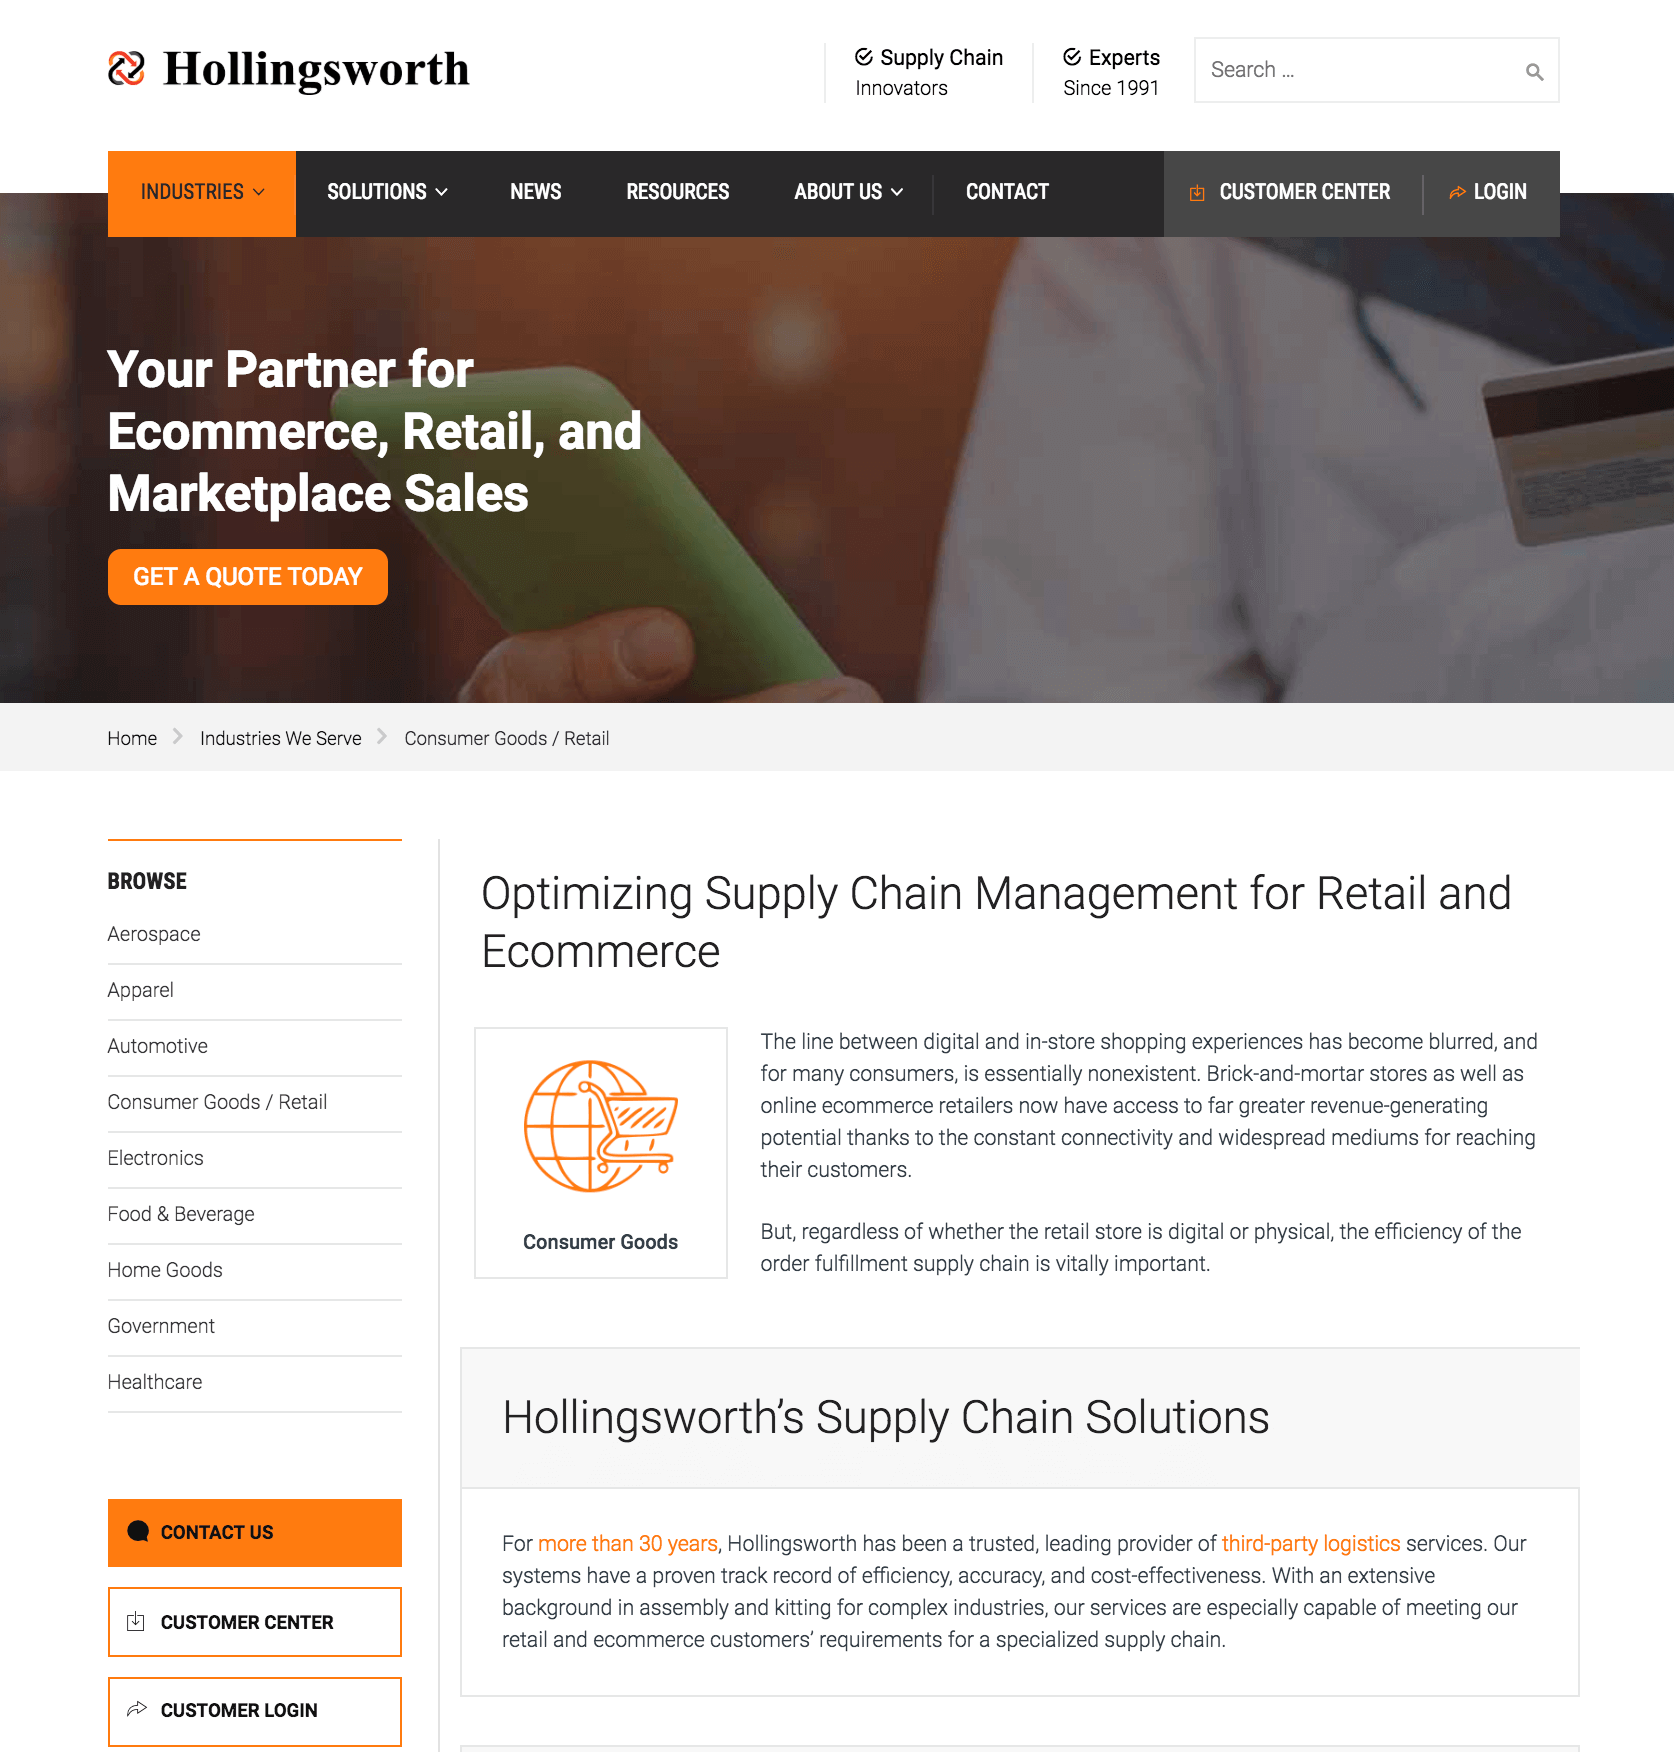 Screenshot of Hollingsworth's contact us page